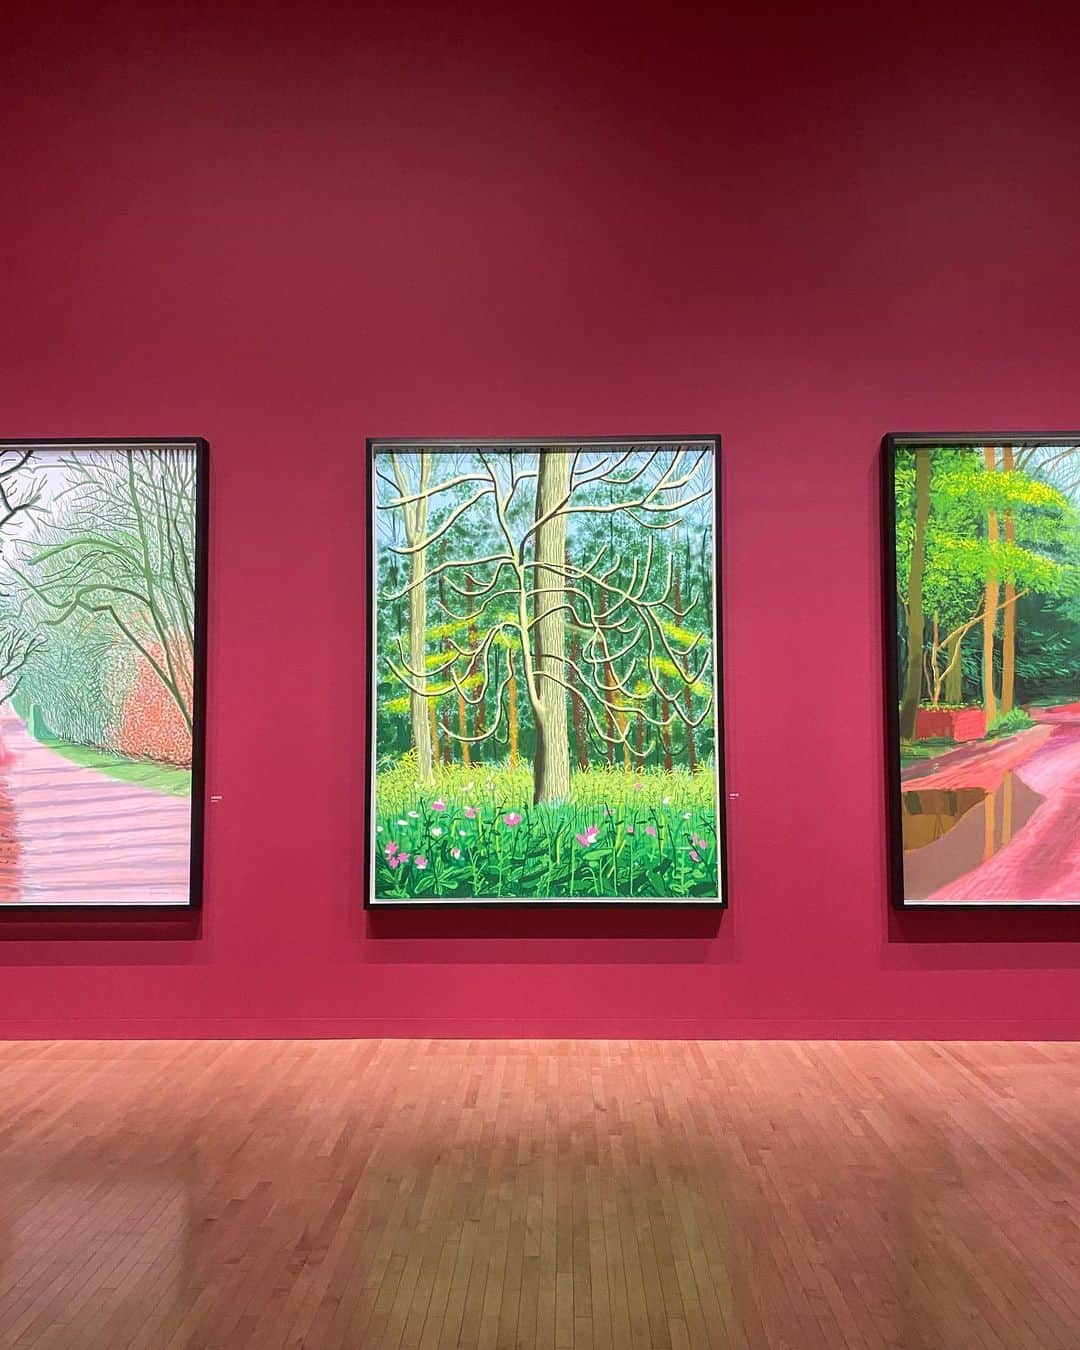 浅見姫香さんのインスタグラム写真 - (浅見姫香Instagram)「Does David Hockney tend to paint his favorite subjects well? Maybe it was because he cared for the people around him. The work "Dog days" depicts his two dachshunds from different angles. He also paints flowers well, and often features his beloved lover and parents in his paintings. In his later years, he used an iPad to paint a number of landscapes seen from the window of his home. I wonder where the road to “The Arrival of Spring" leads to. It's so cheerful and bright that a walk would be fun. For the first time in a long time, he saw a work with the feeling that he was painting what he wanted to paint honestly, without hiding the painter's stubbornness. I bought a postcard to my mother of his work "Parents (1977)", but she unexpectedly replied "I'm scared" and laughed.  デイヴィッド・ホックニーは好きな対象を良く描く傾向があるのか。きっとそれは、彼が周りの人を大切にしていたからであろう。 “Dog days”という作品は、彼の愛犬である２匹のダックスフンドを様々な角度から描いている。花の絵も良く描いているし、彼の恋人や両親を度々、絵に登場させている。晩年は、iPadを使い自宅の窓際から見える風景をいくつも描いている。 「春の到来」と言う作品の道は、どこへ繋がっているのかなぁ。と散歩が楽しくなりそうなほど朗らかで明るい。 久しぶりに画家の気難しさが見え隠れせず、素直に描きたい物を描いているのであろう感覚の作品を見た。母に「両親(1977年)」という作品のポストカードを買っていったが「なんか怖い」と返って来たのは予想外で笑った。 デイヴィッド・ホックニーの両親の写真は、ワタリウム美術館で飾ってあった時の物。デイヴィッドのポップな装いとチャーミングさは、両親から受け継いだんだろうな。」8月9日 19時07分 - himeka_asami_official